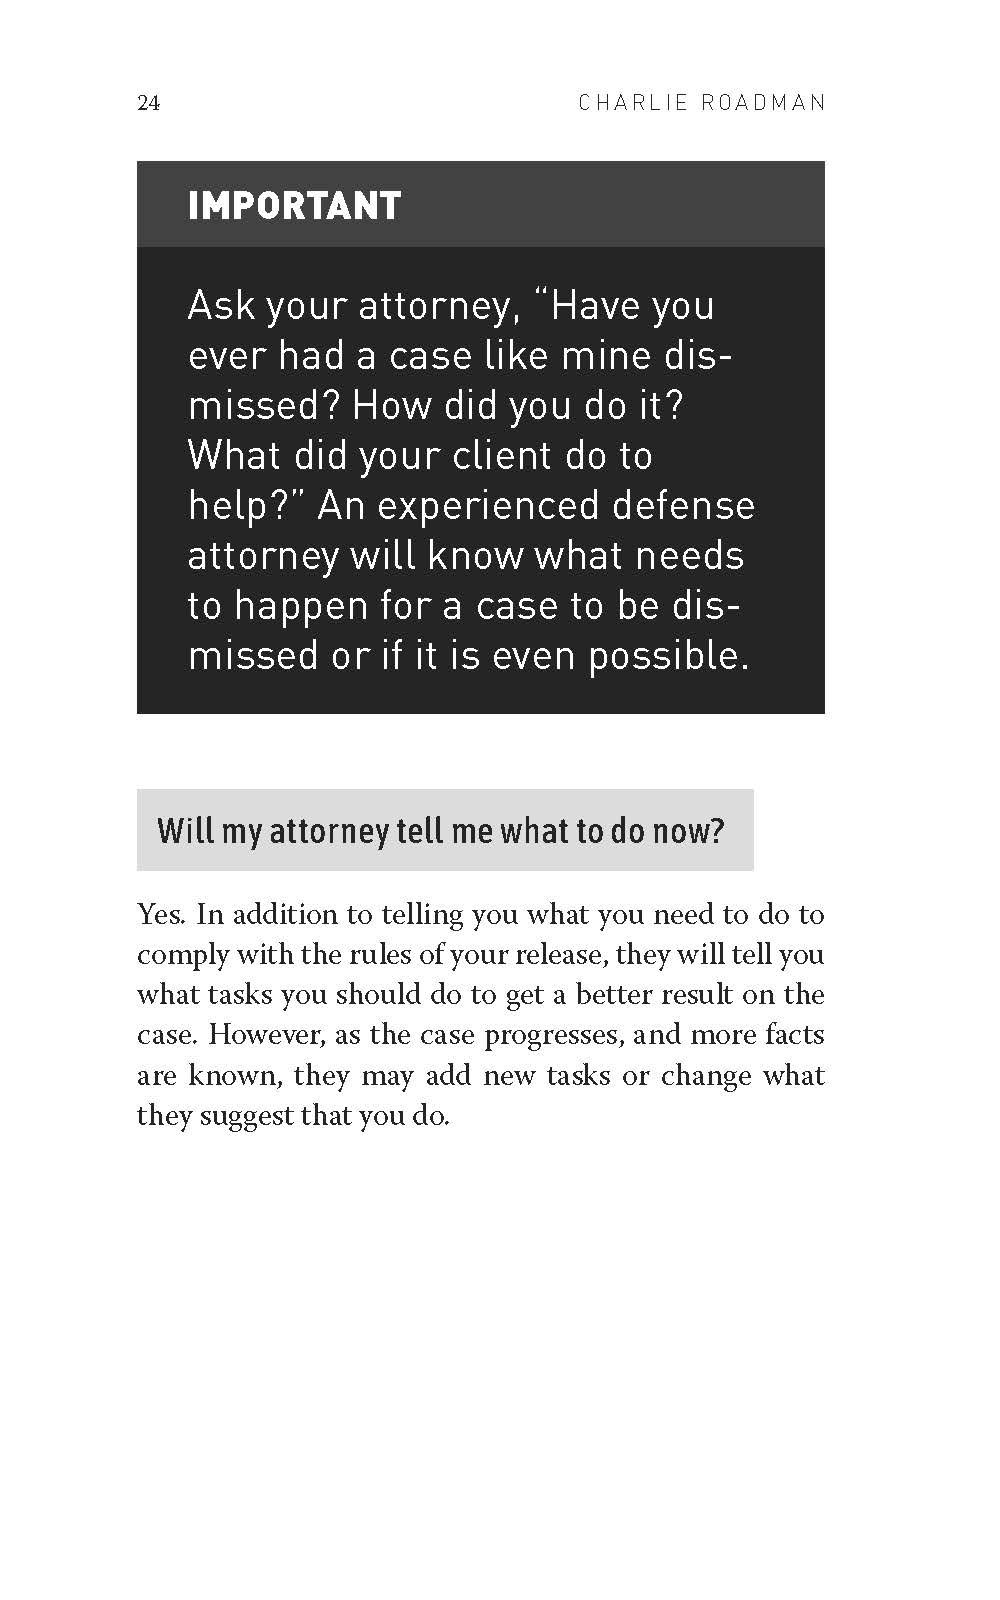 Sample_of_Defendant_s_Guide_to_Defense_Page_26.jpg